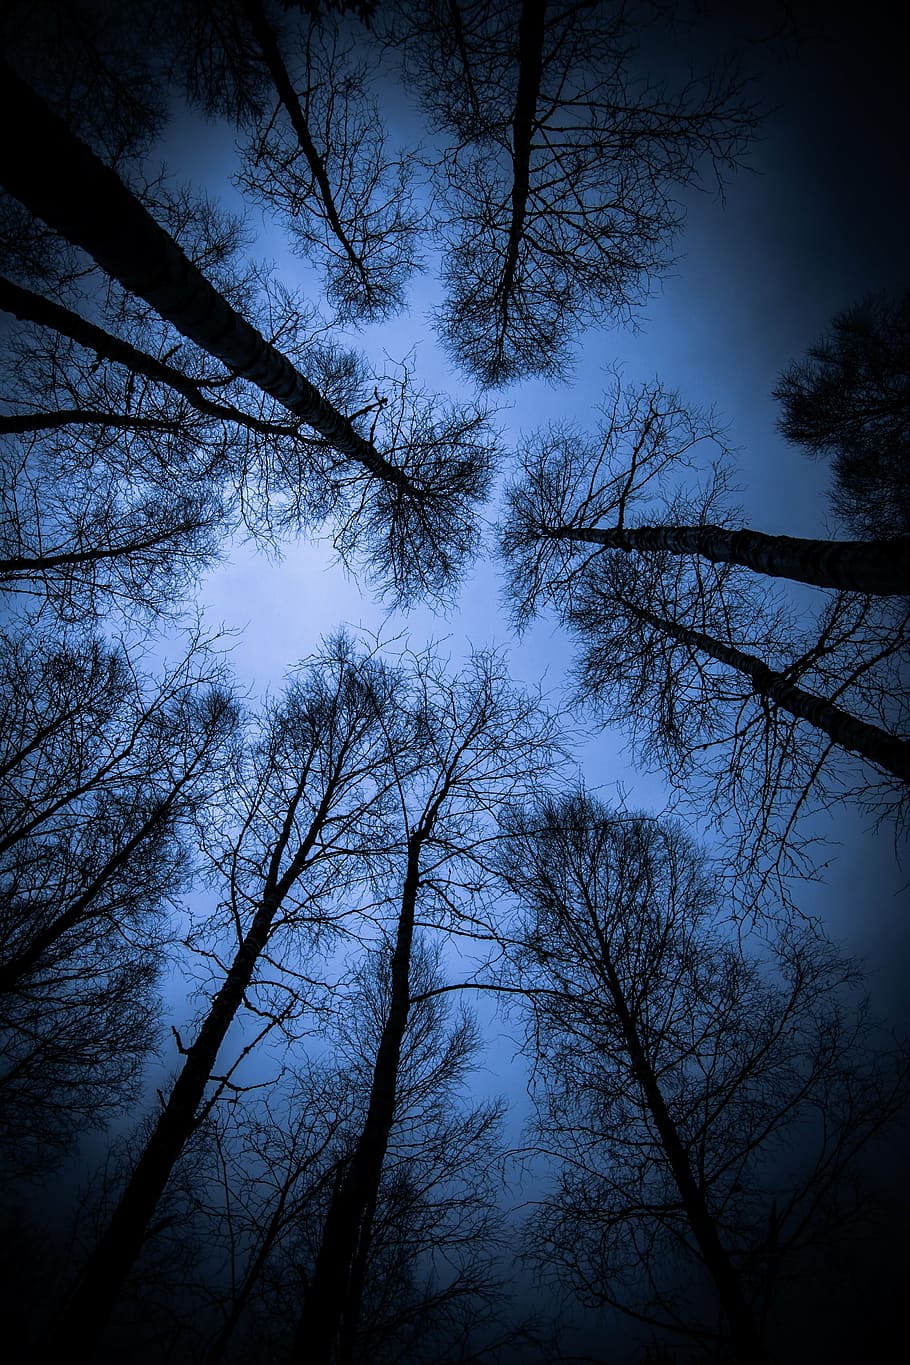 silhouette trees, low, angle shot, wood, from top to bottom, birch, birch trees, top, branches, darkness